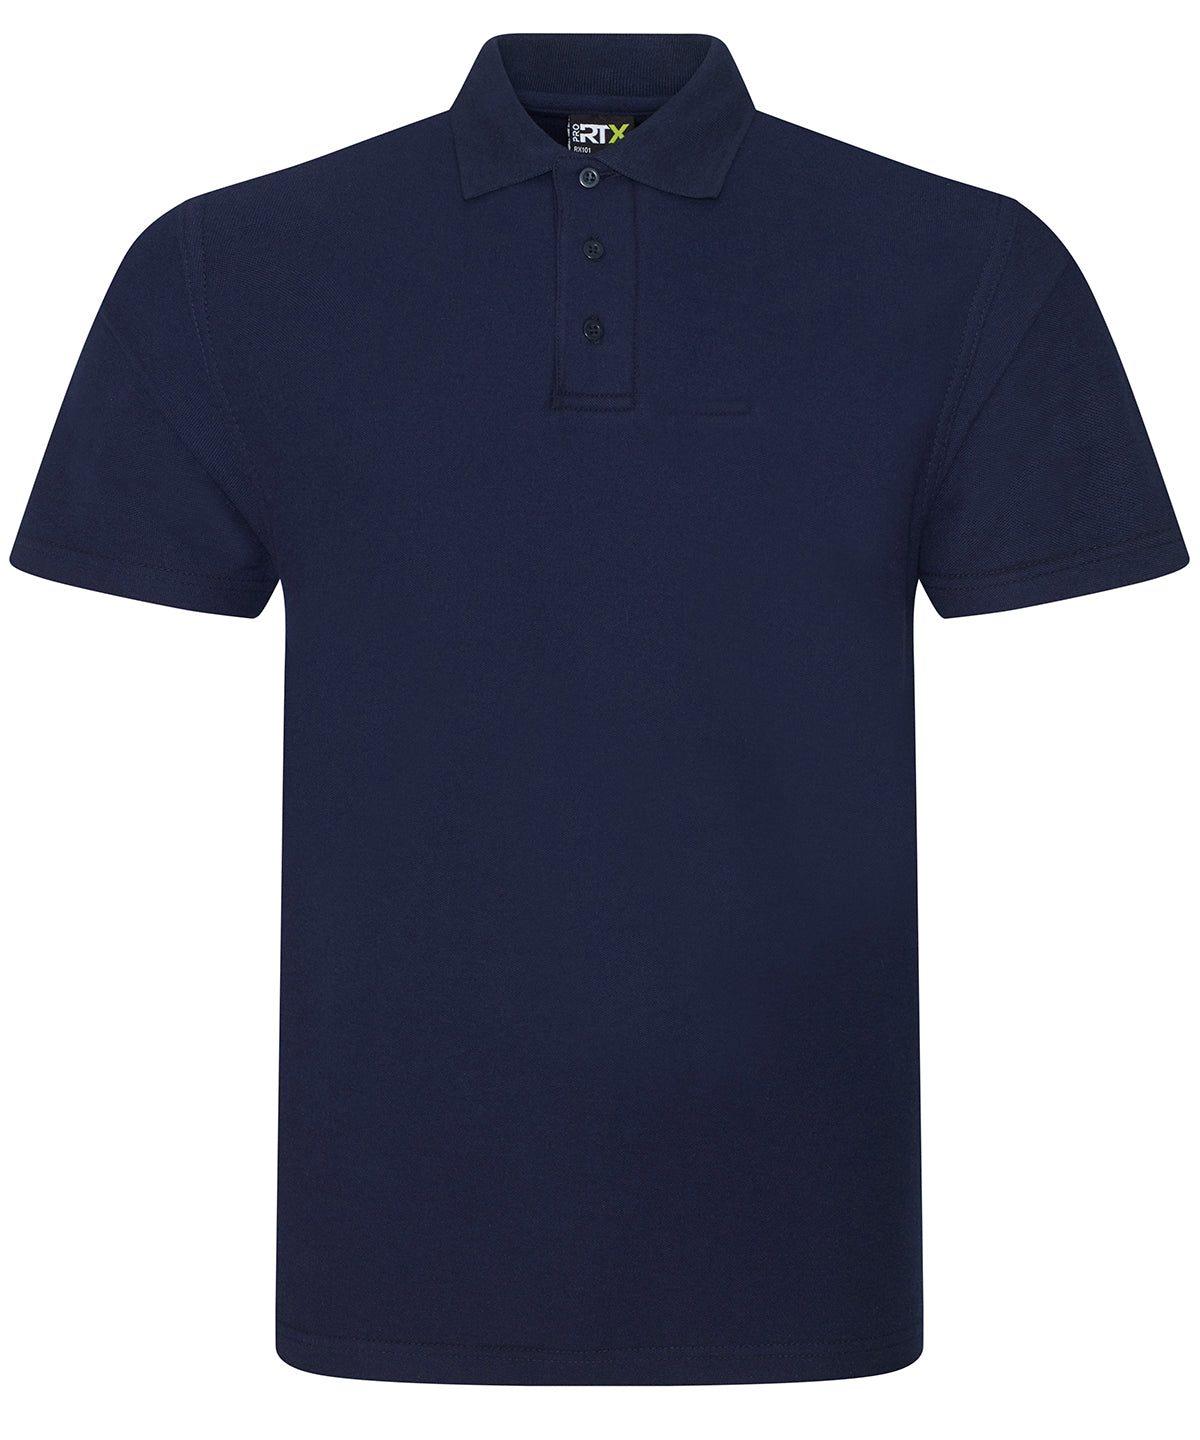 Unisex Navy Polo Shirt With East Coast College Logo - Childcare T-Level